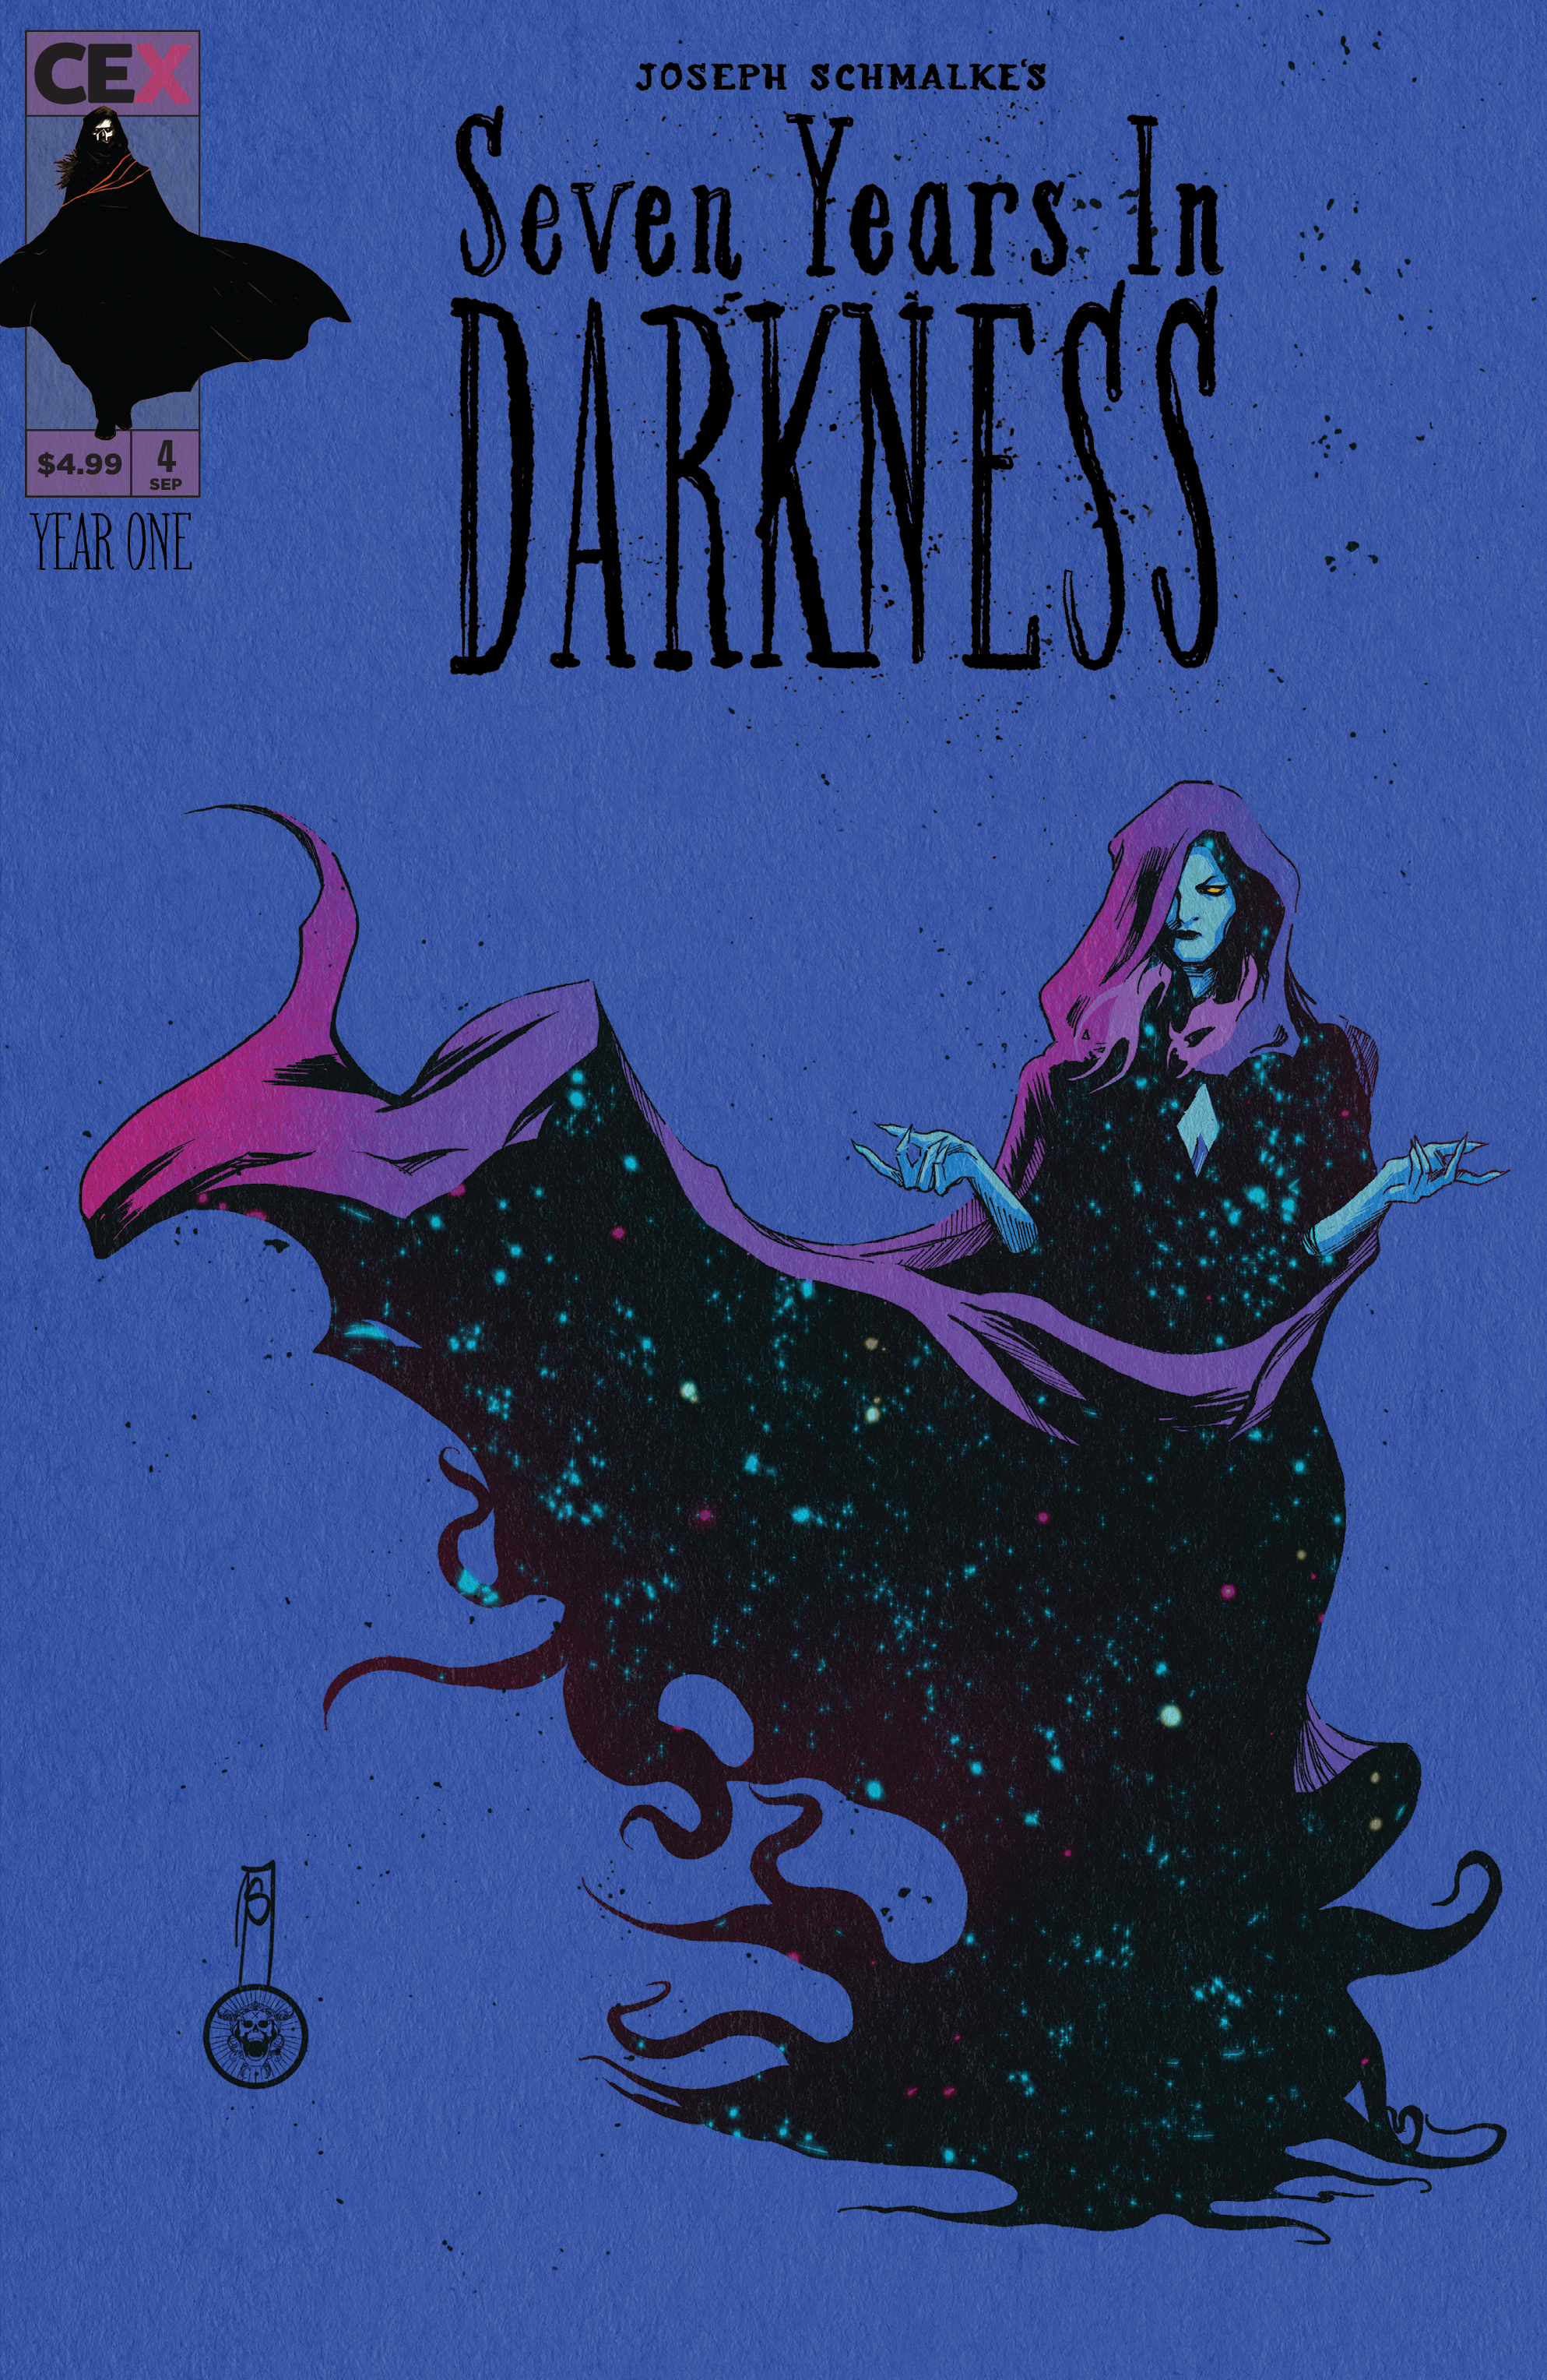 Seven Years In Darkness #4 Cover A Schmalke (Of 4)